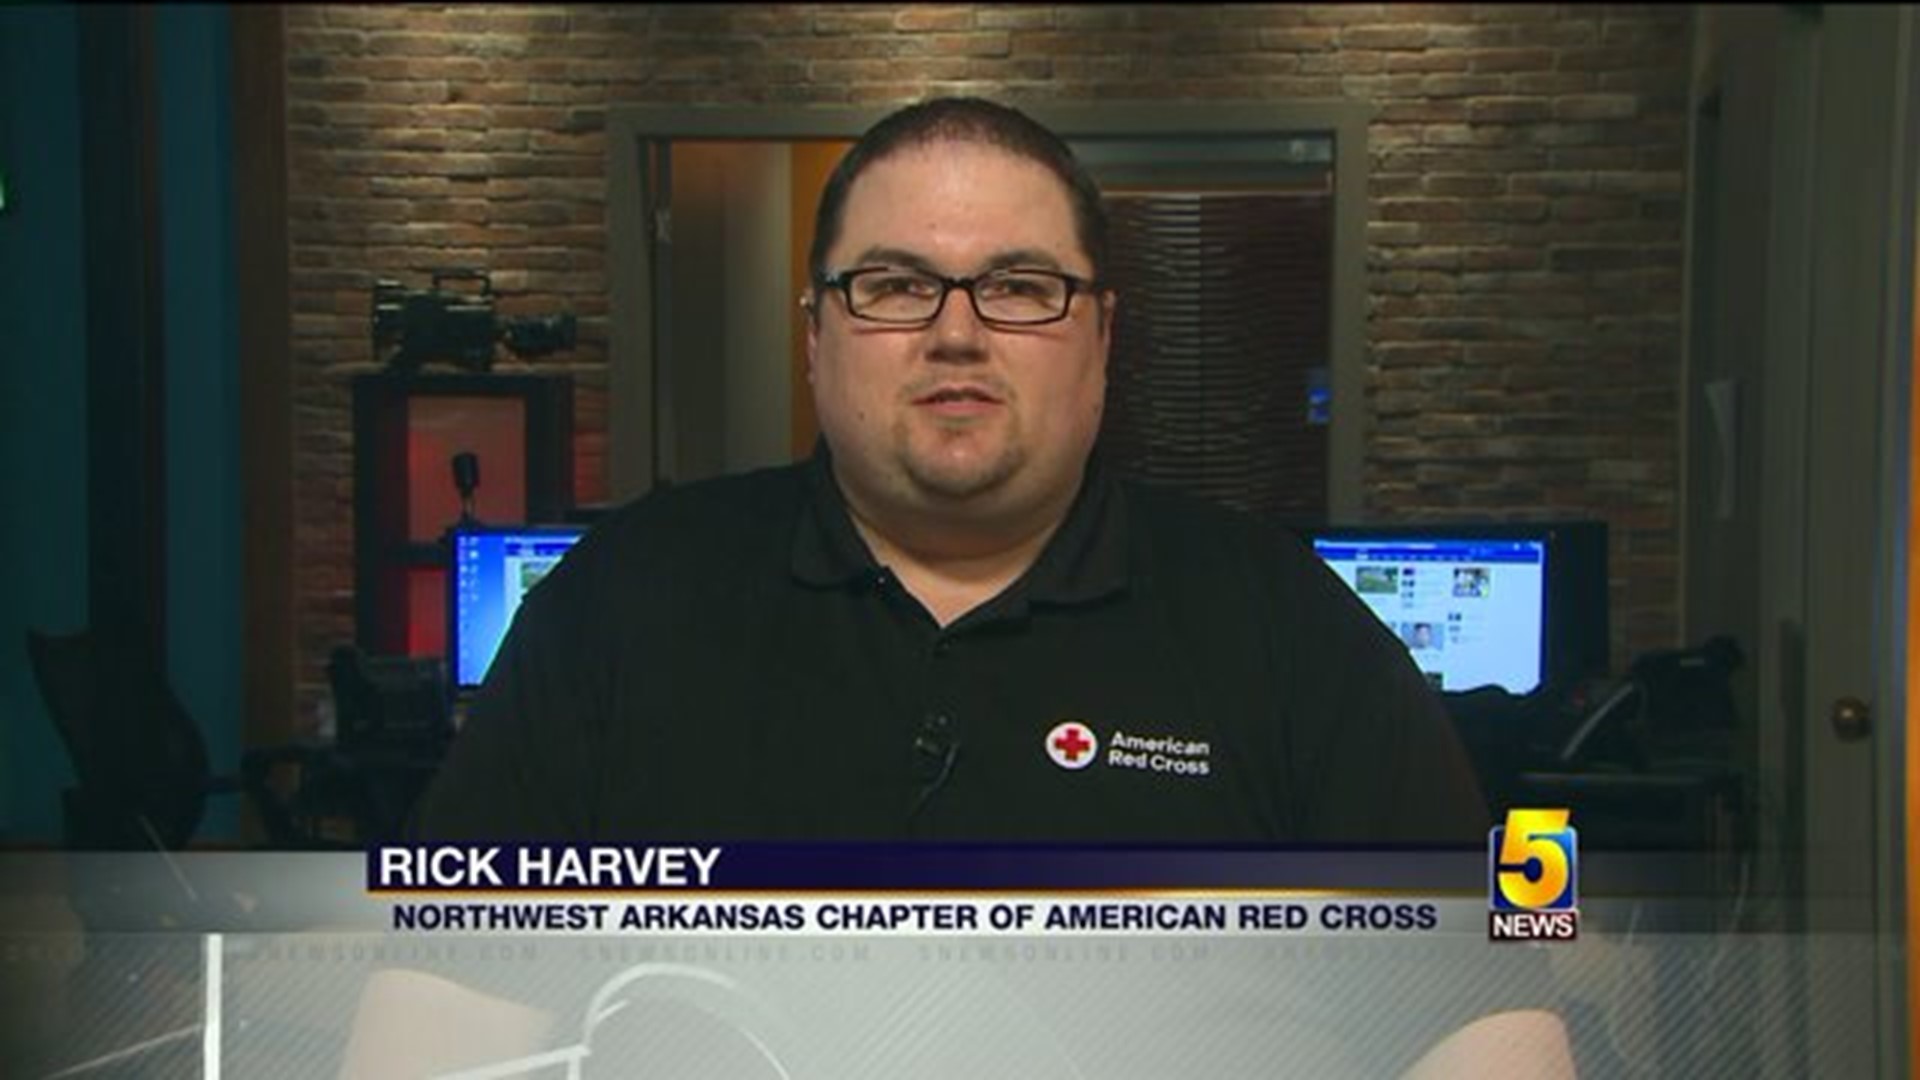 Red Cross Explains Fire Safety & Response